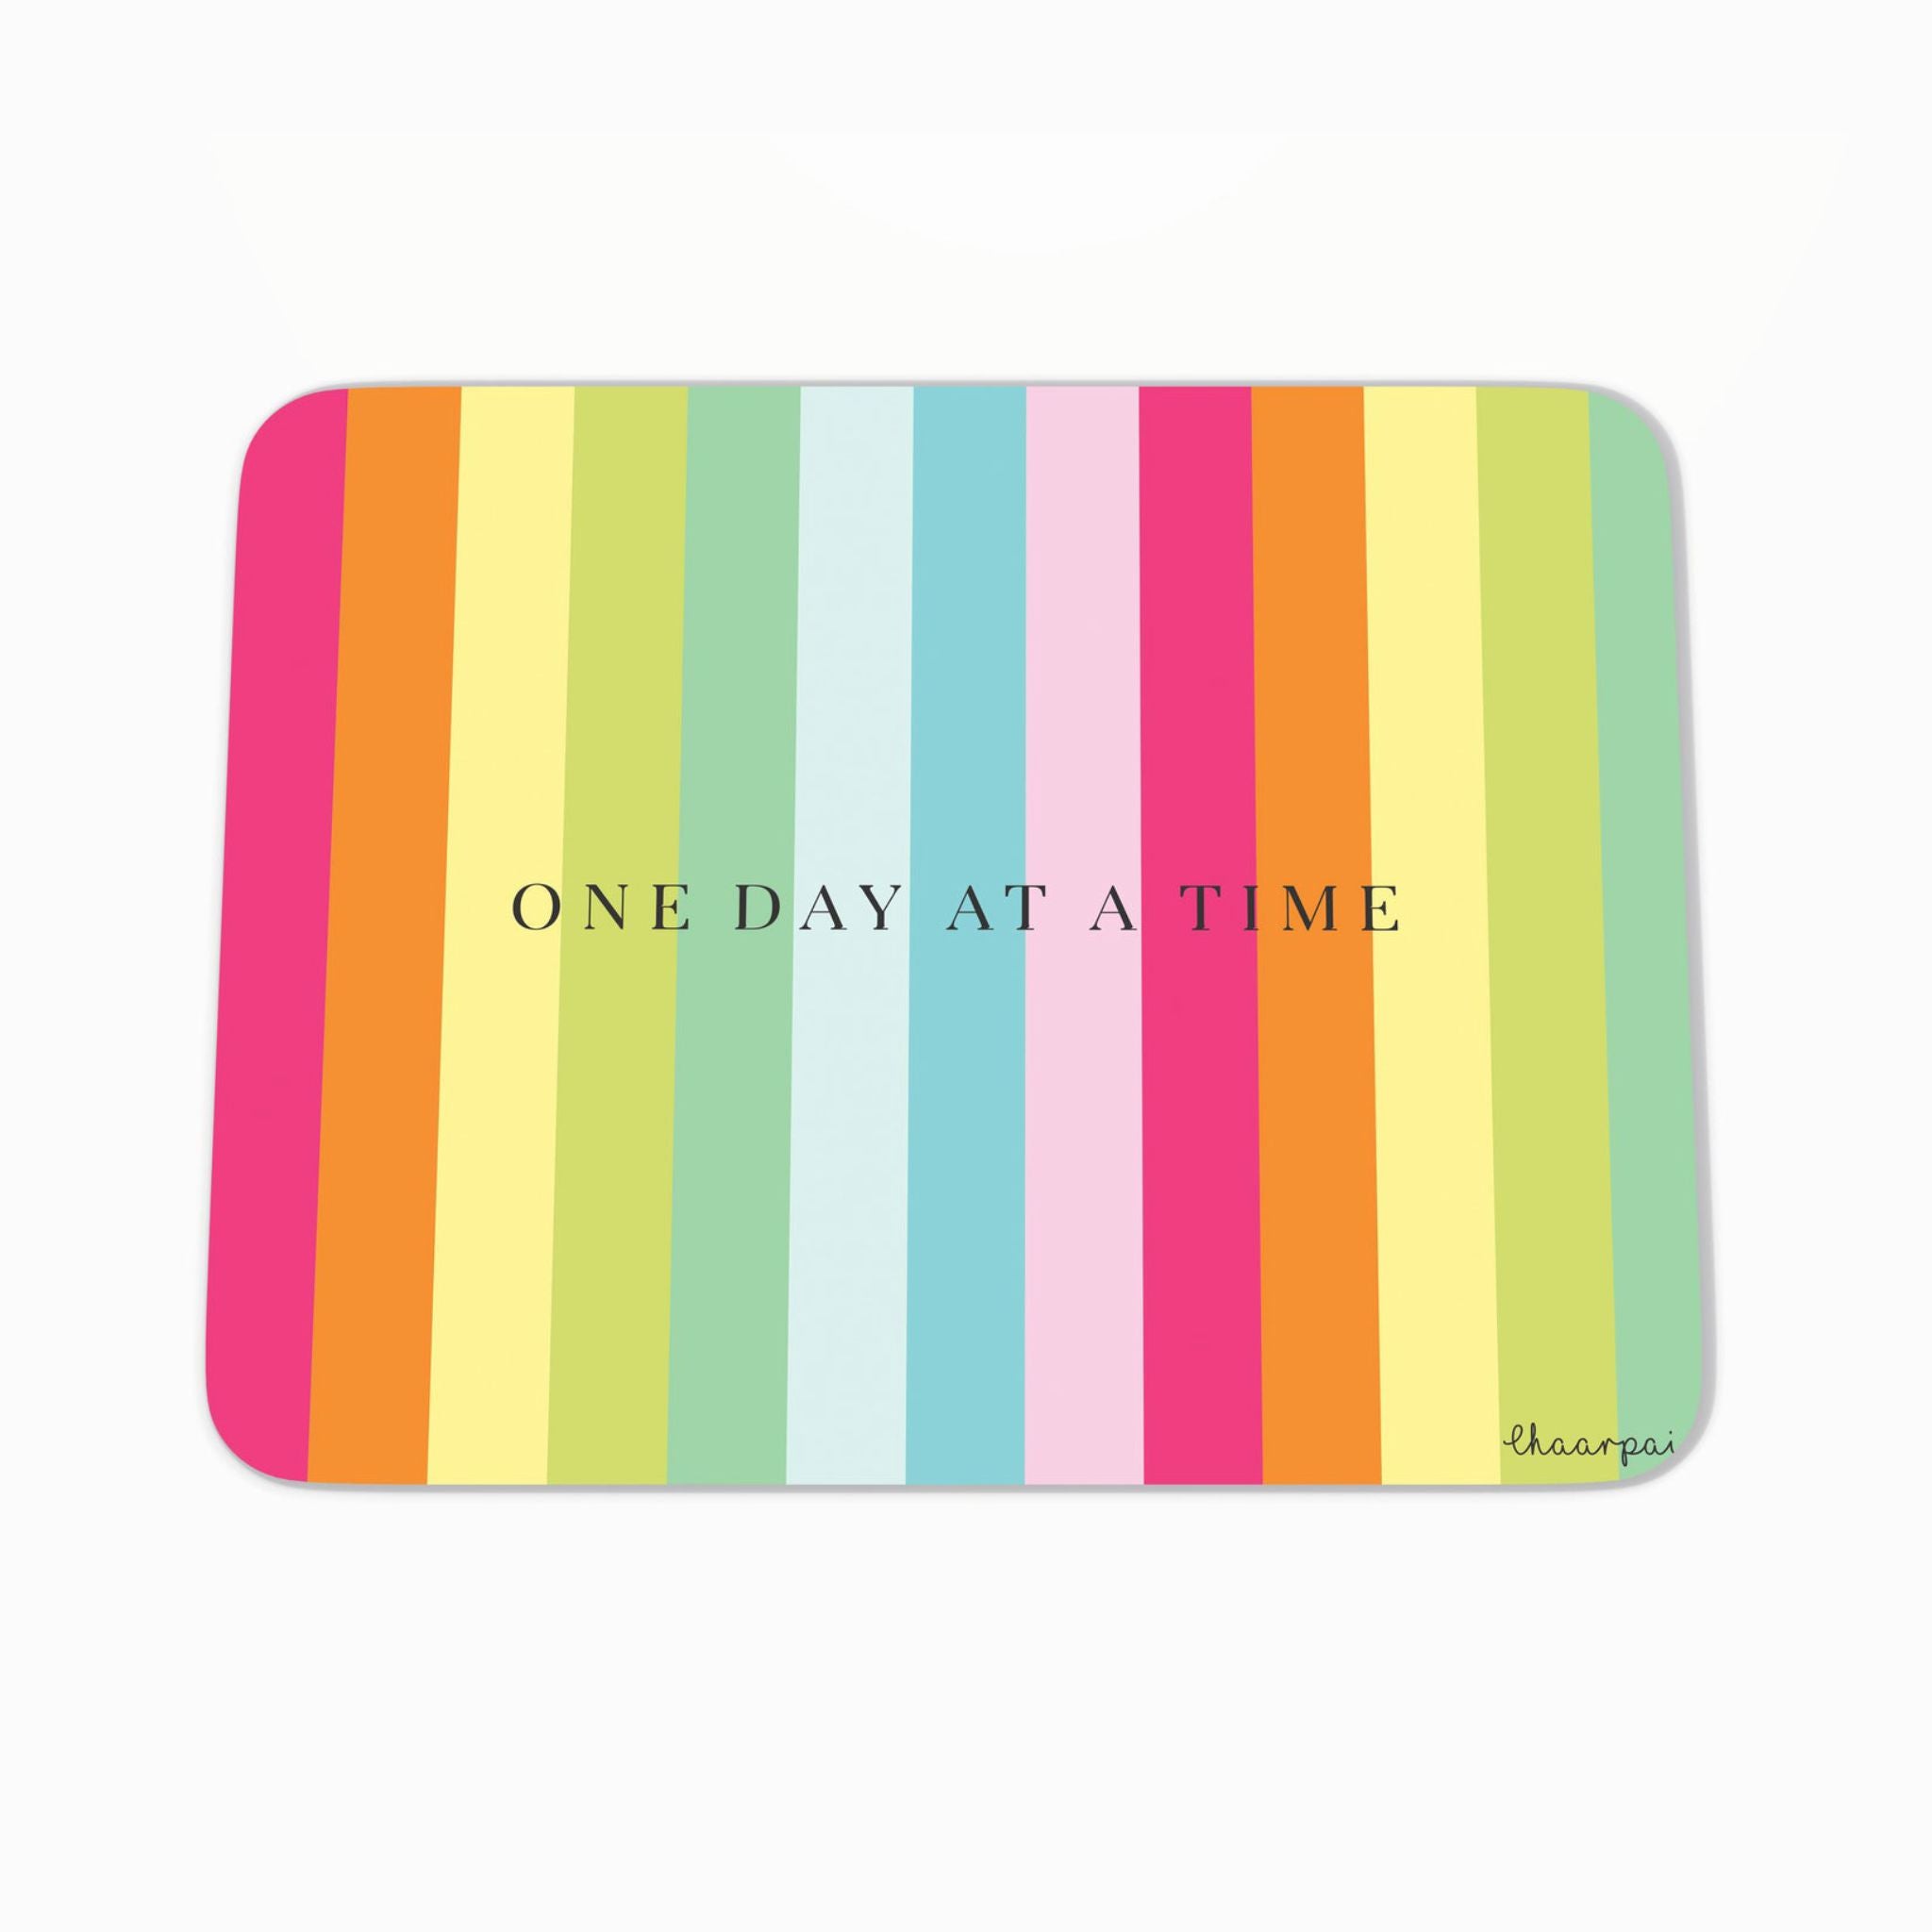 One day at a time Mousepad